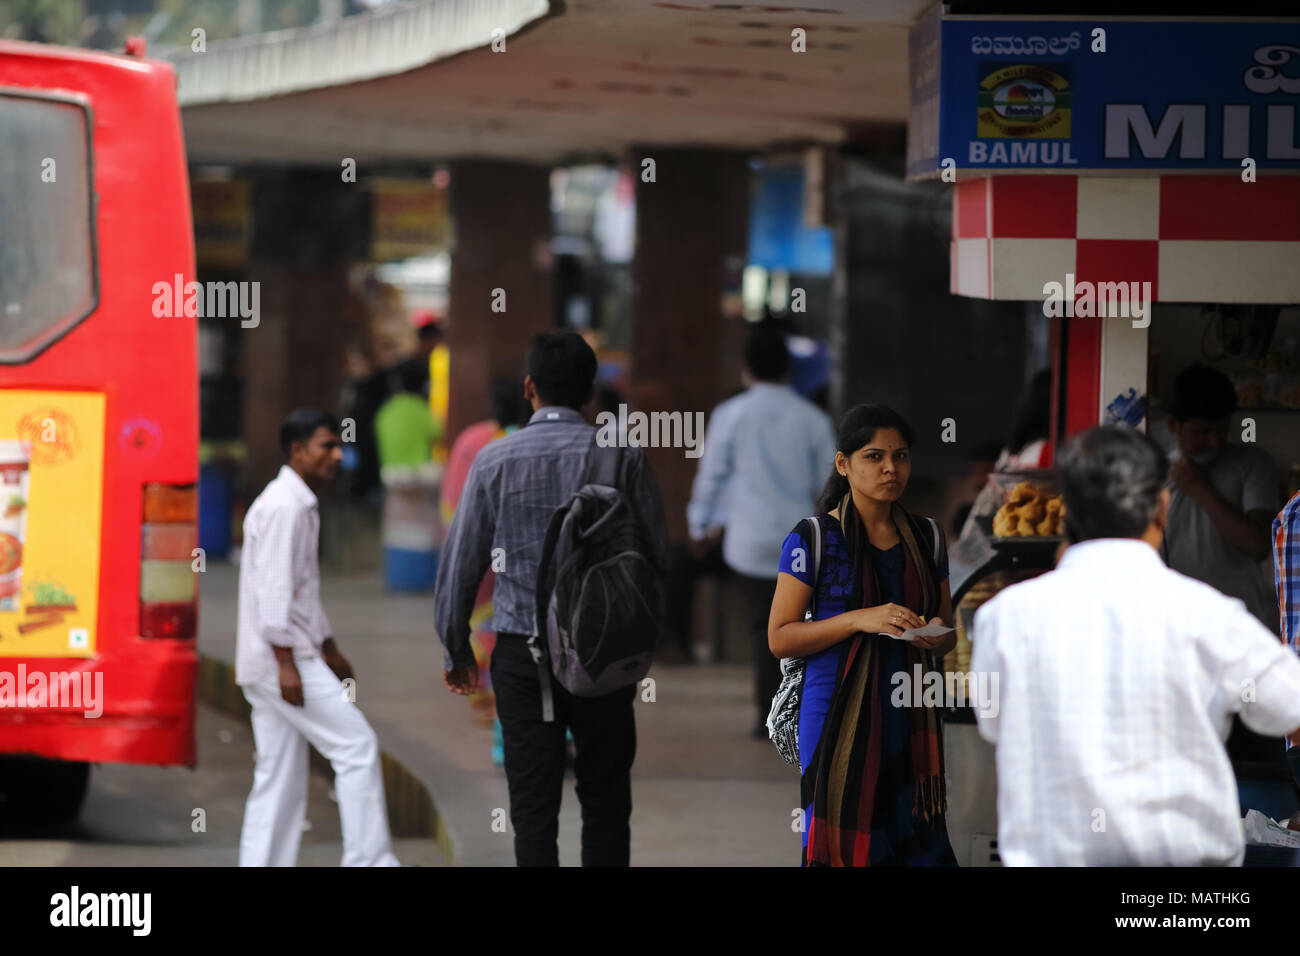 Bangalore, India - October 23, 2016: Unknown Indian girl in traditional wear stands eating samosa in the city bus terminal, a delicious local food. Stock Photo